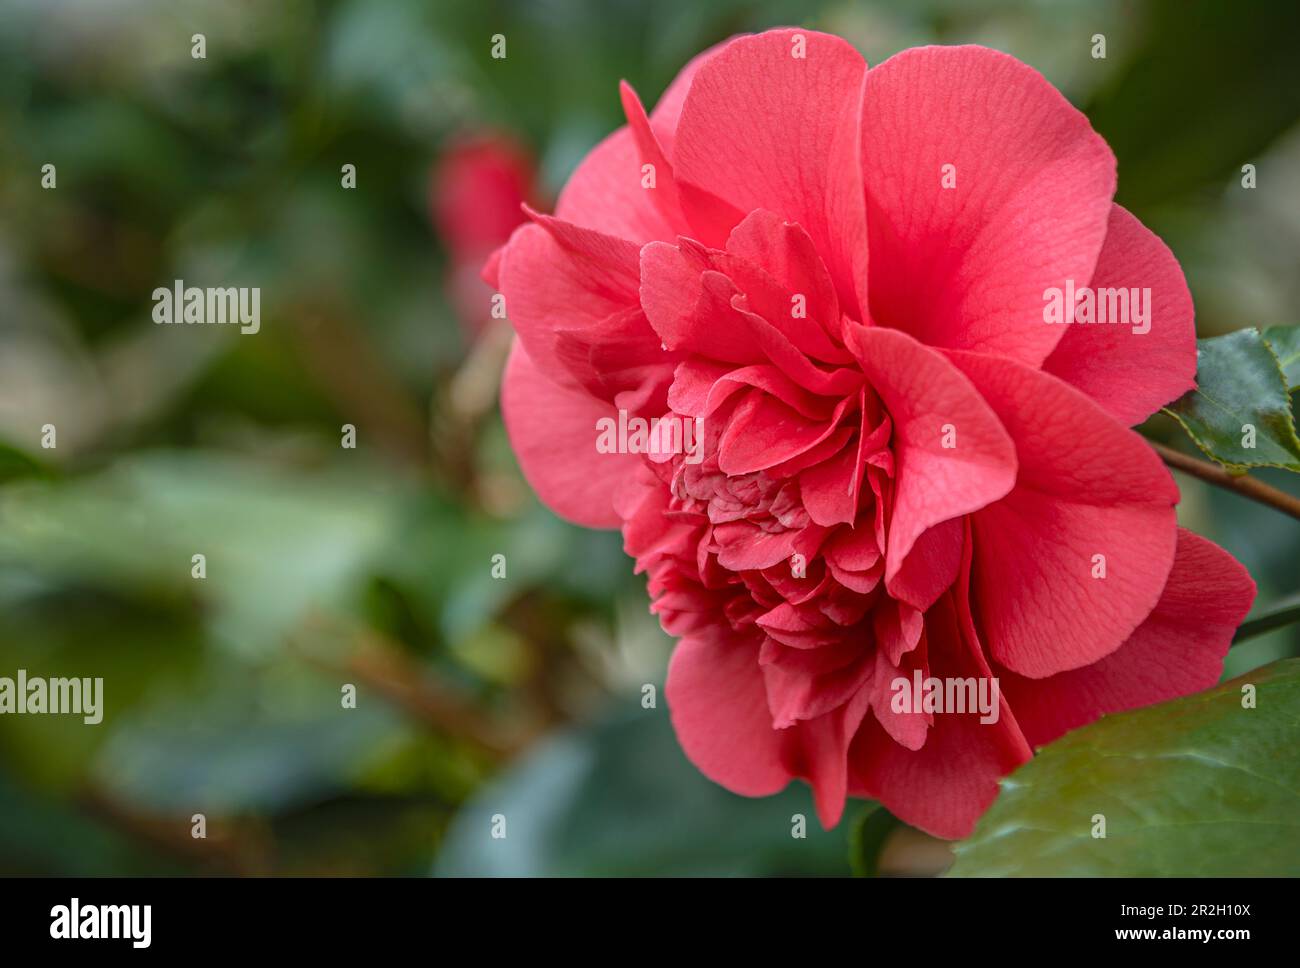 Pink flowers of a Camellia Japonica Chandlers Elegans in Landschloss Zuschendorf, Pirna, Saxony, Germany Stock Photo